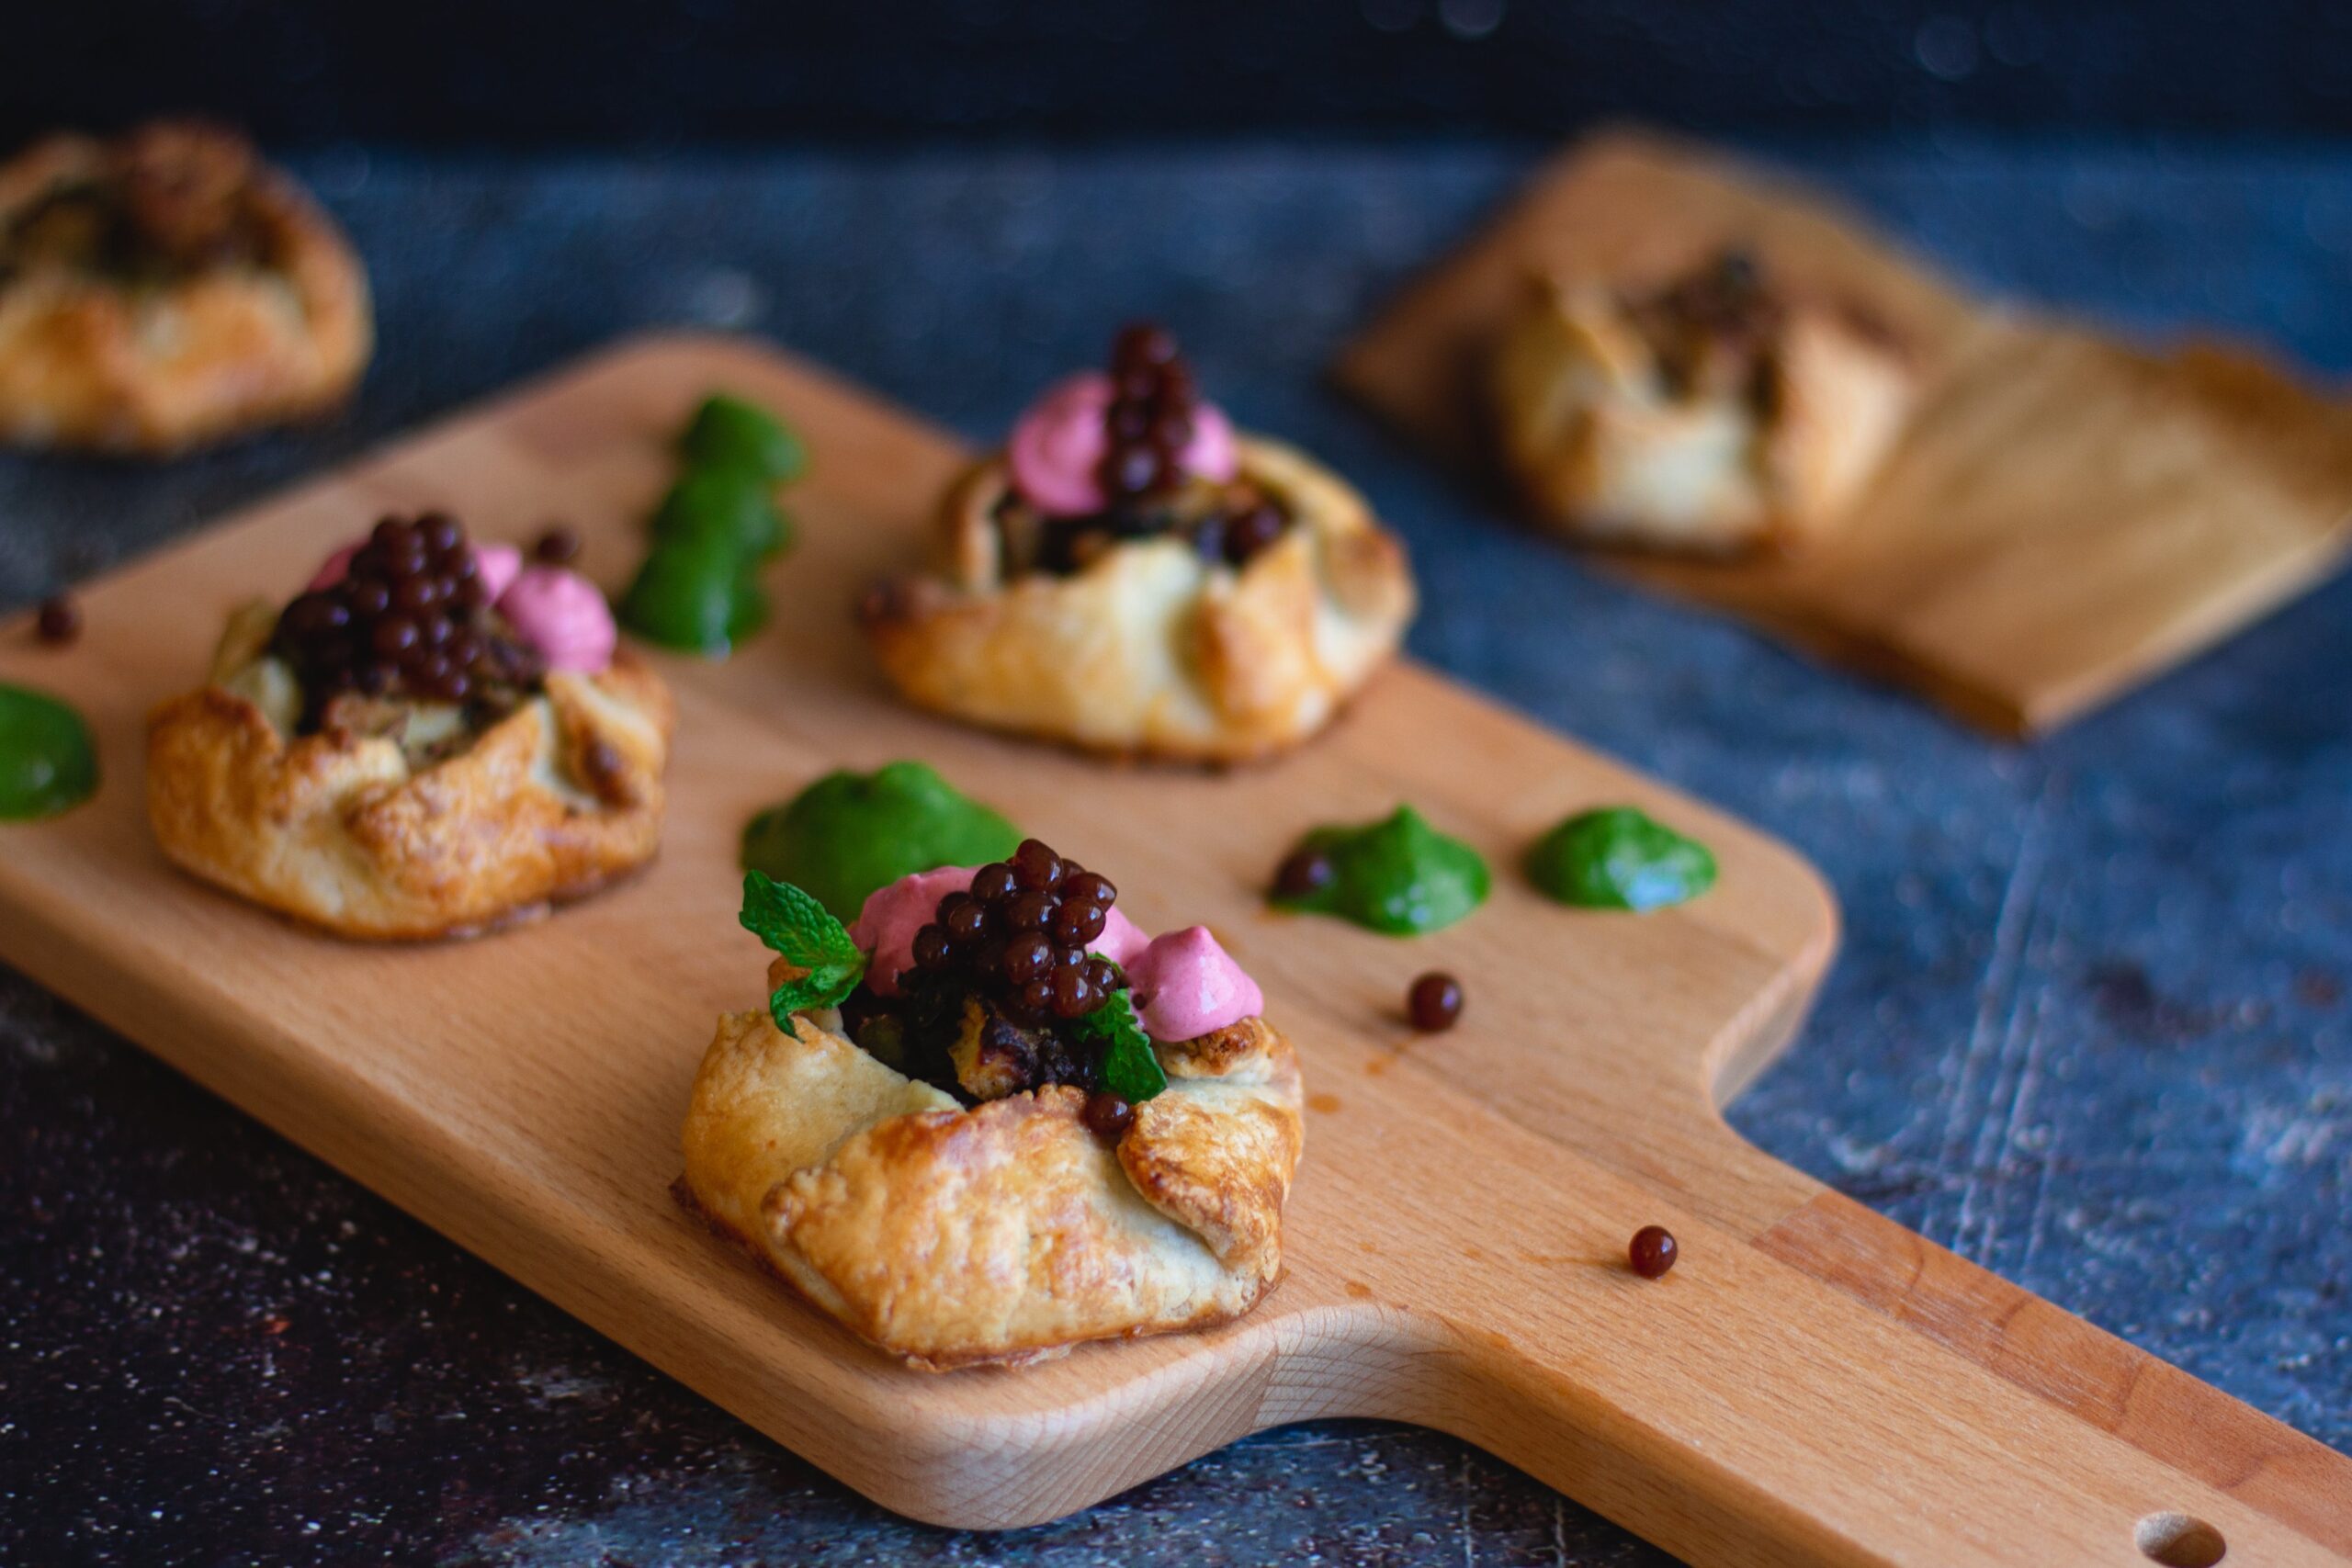 Whats Your Go-to Recipe For A Fast And Flavorful Indian Appetizer?